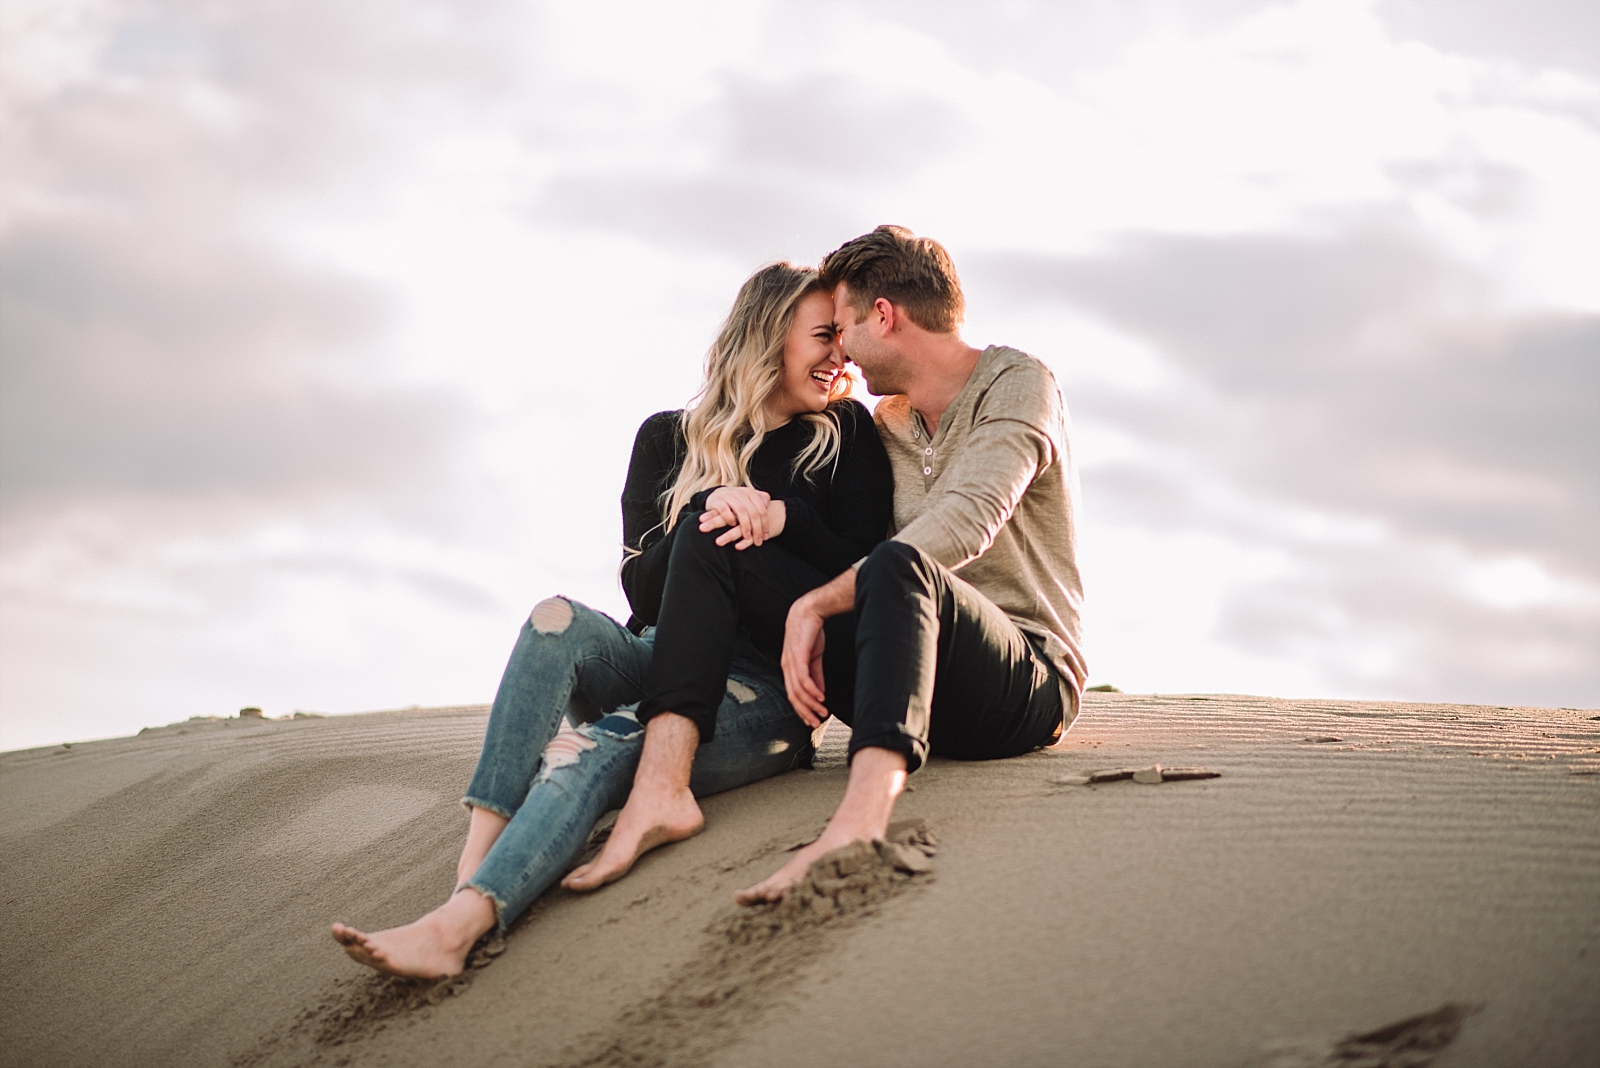 couple sitting together on the sand dunes, desert, beach